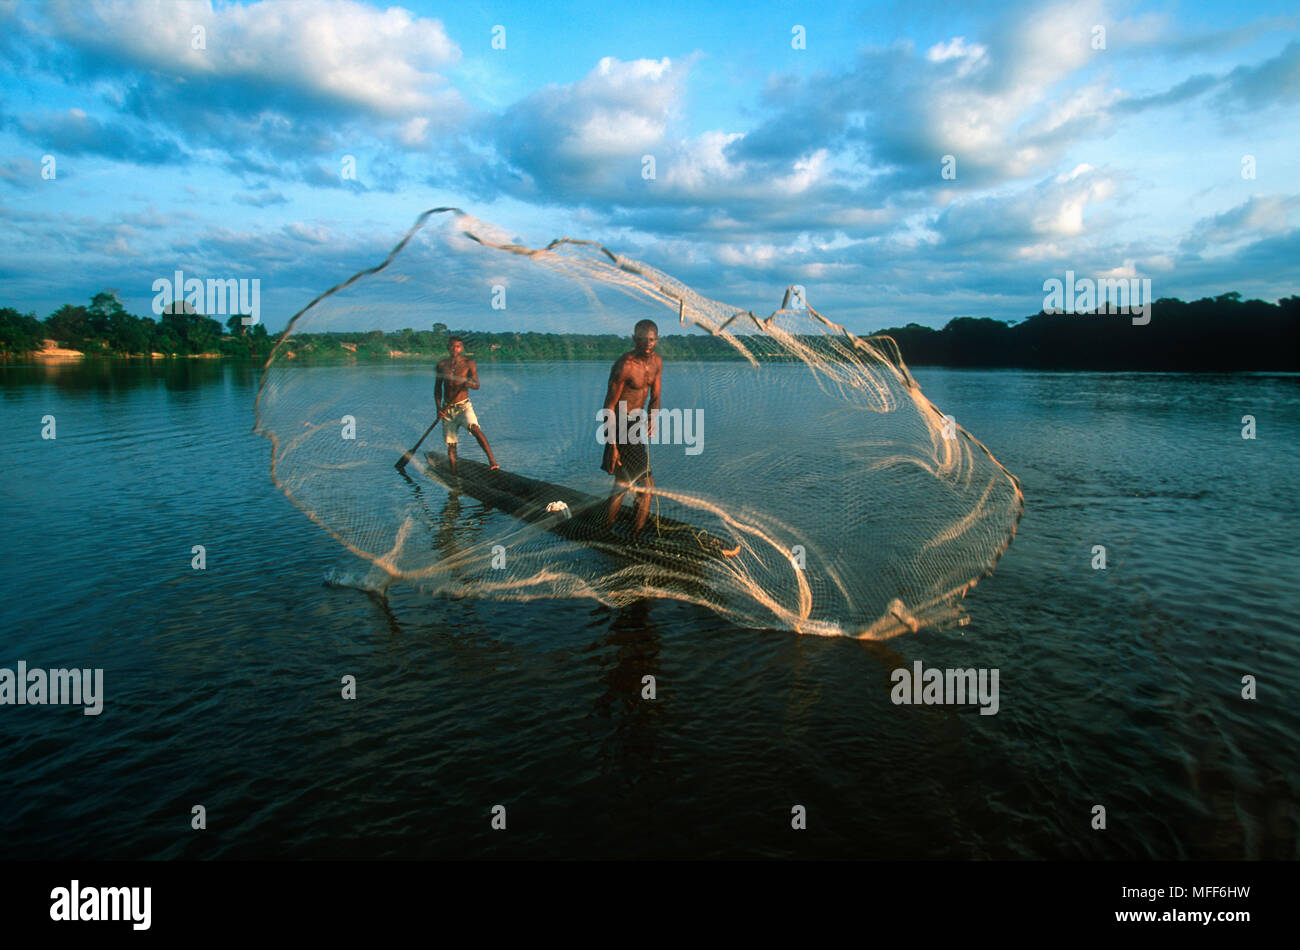 FISHERMAN CASTING NET in the Dzanga River, Central African Republic. Stock Photo